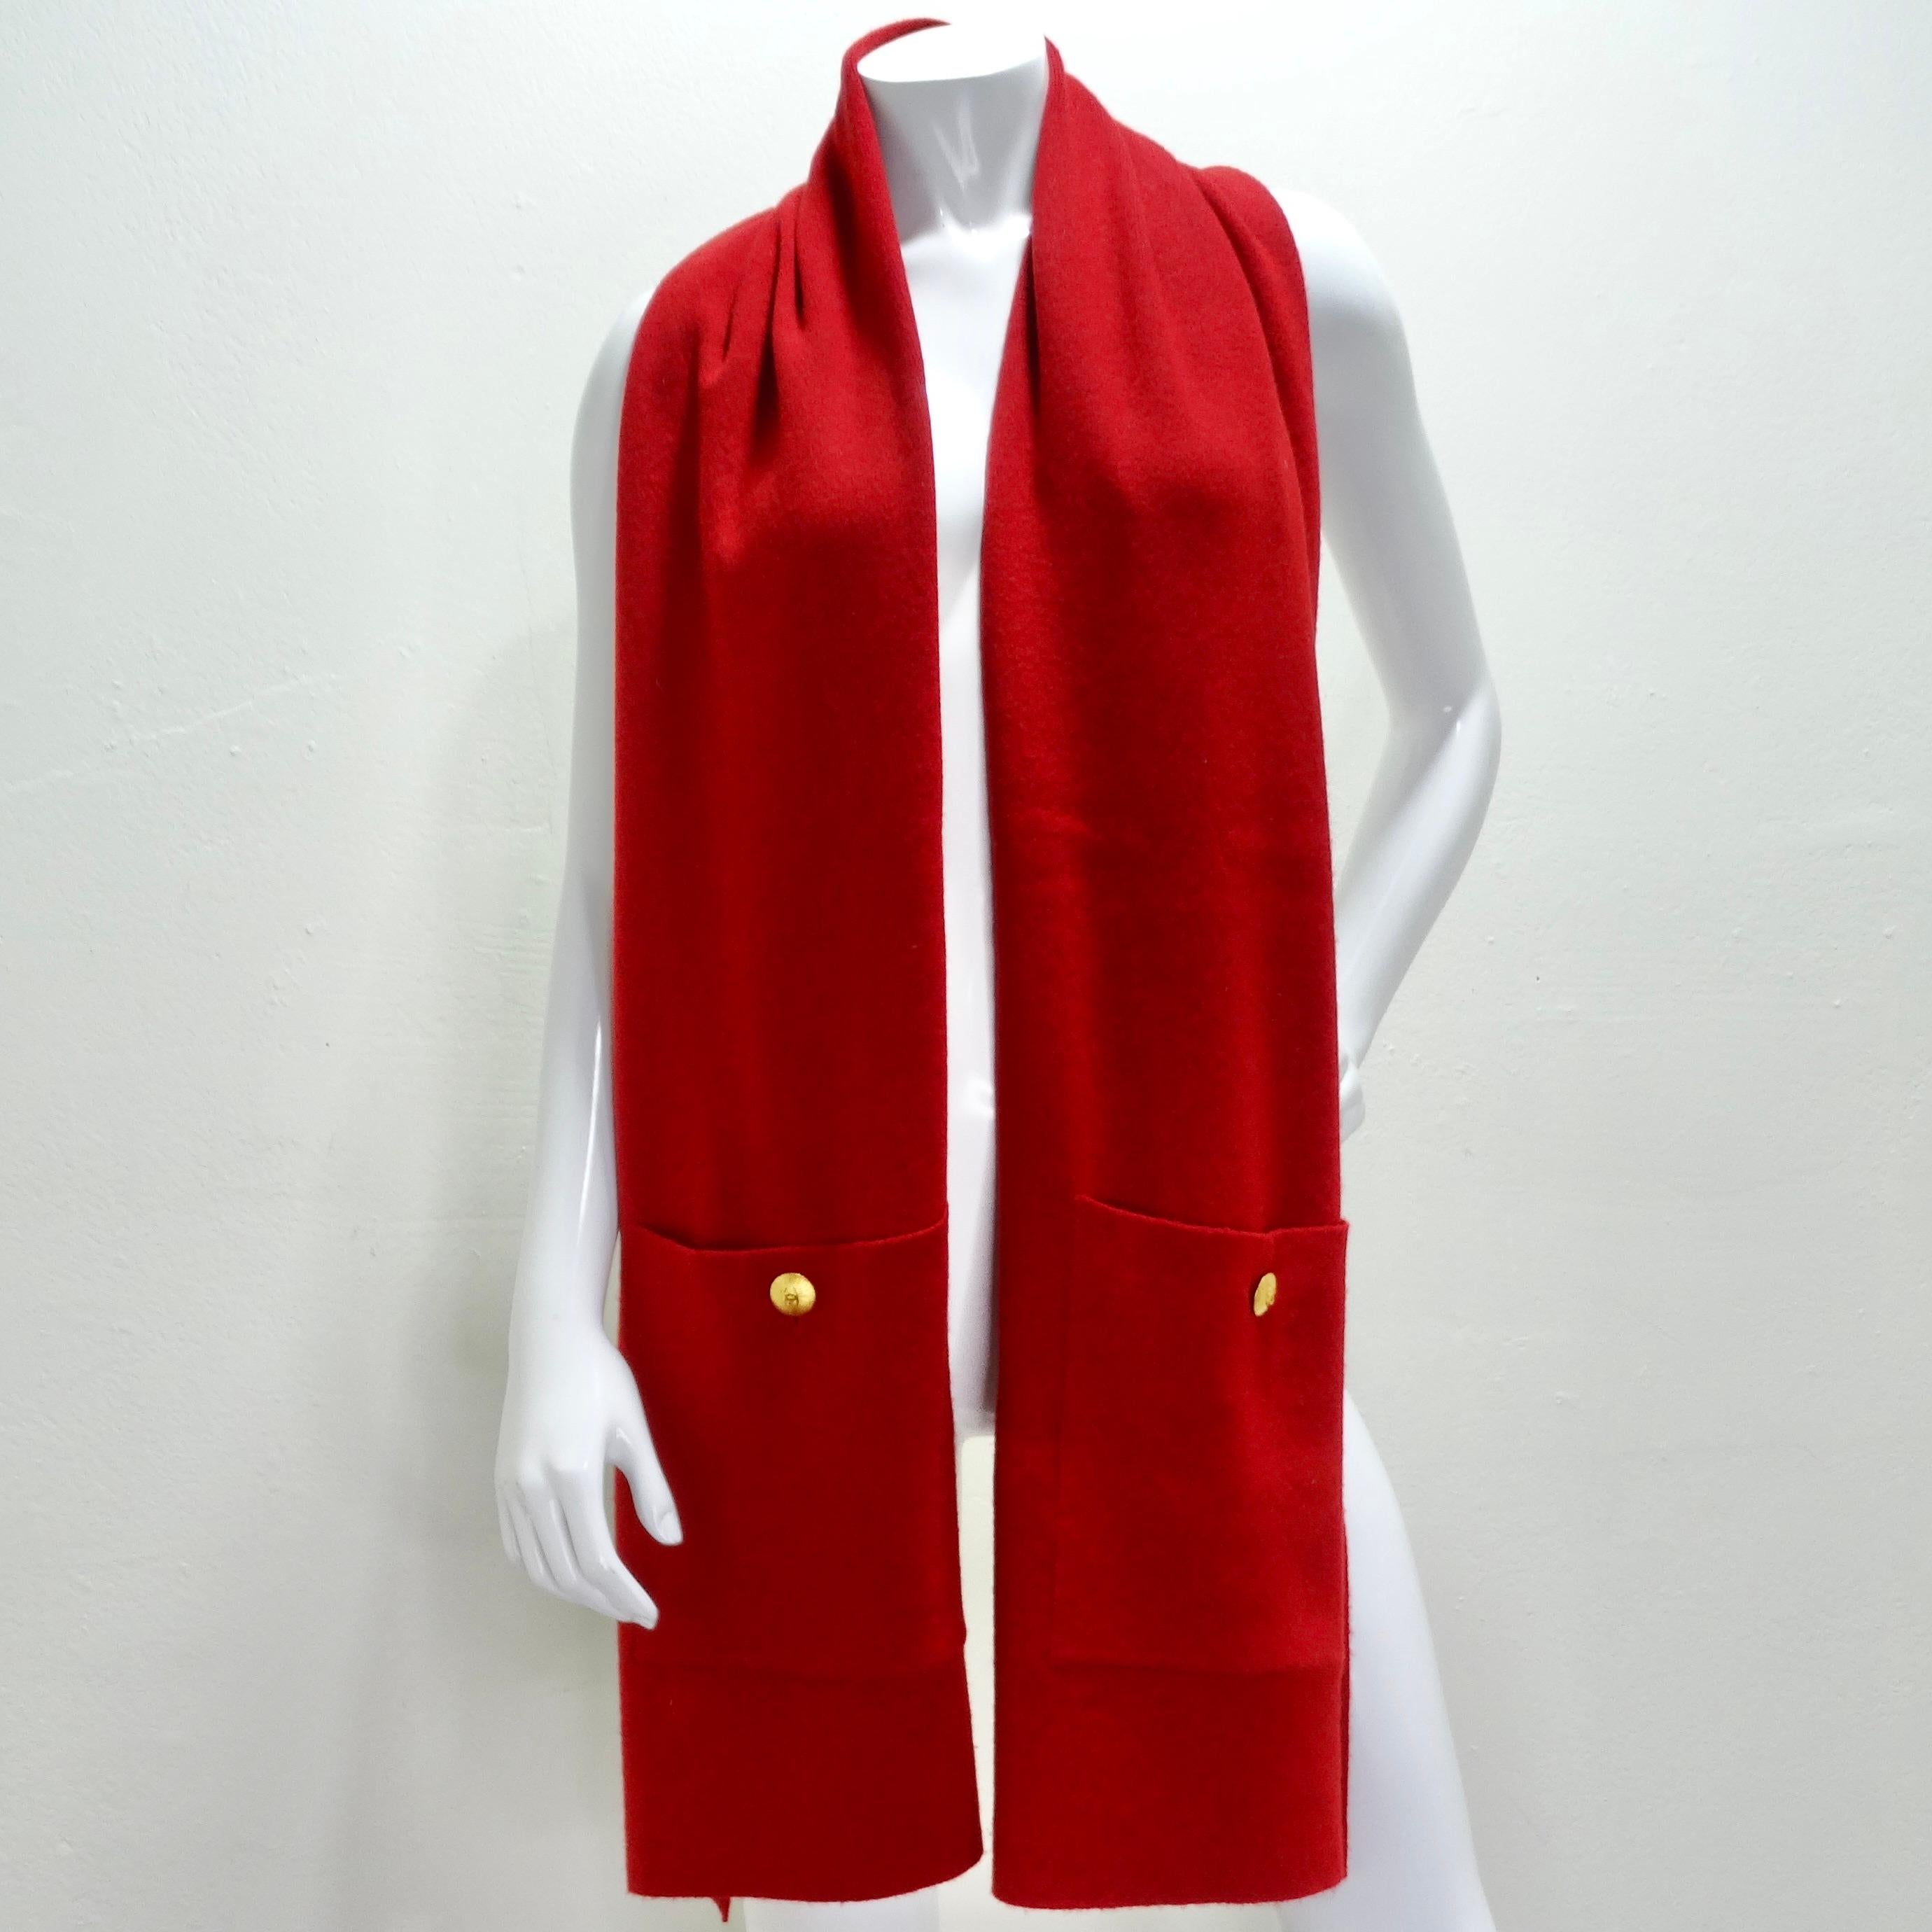 Wrap yourself in luxury with the Chanel 90s Red Cashmere Pocket Scarf. Crafted from incredibly soft cashmere, this thick scarf is not only a stylish accessory but also a functional must-have for the coldest climates. The large pockets at both ends,